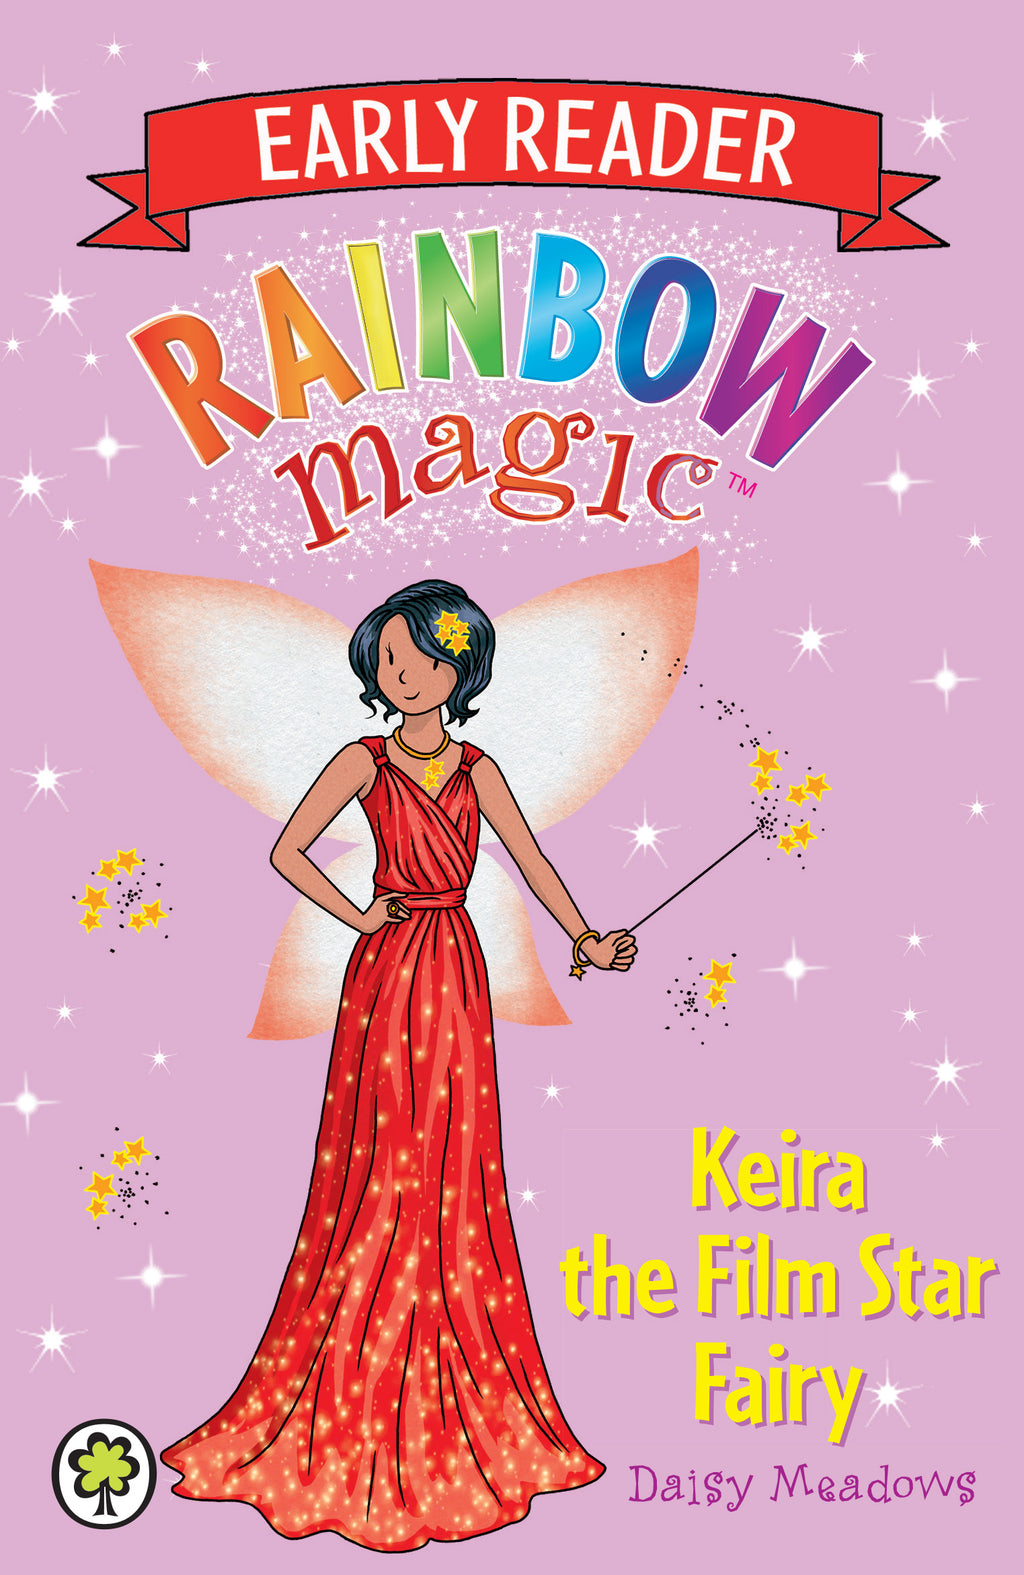 Early Reader: Keira the Film Star Fairy